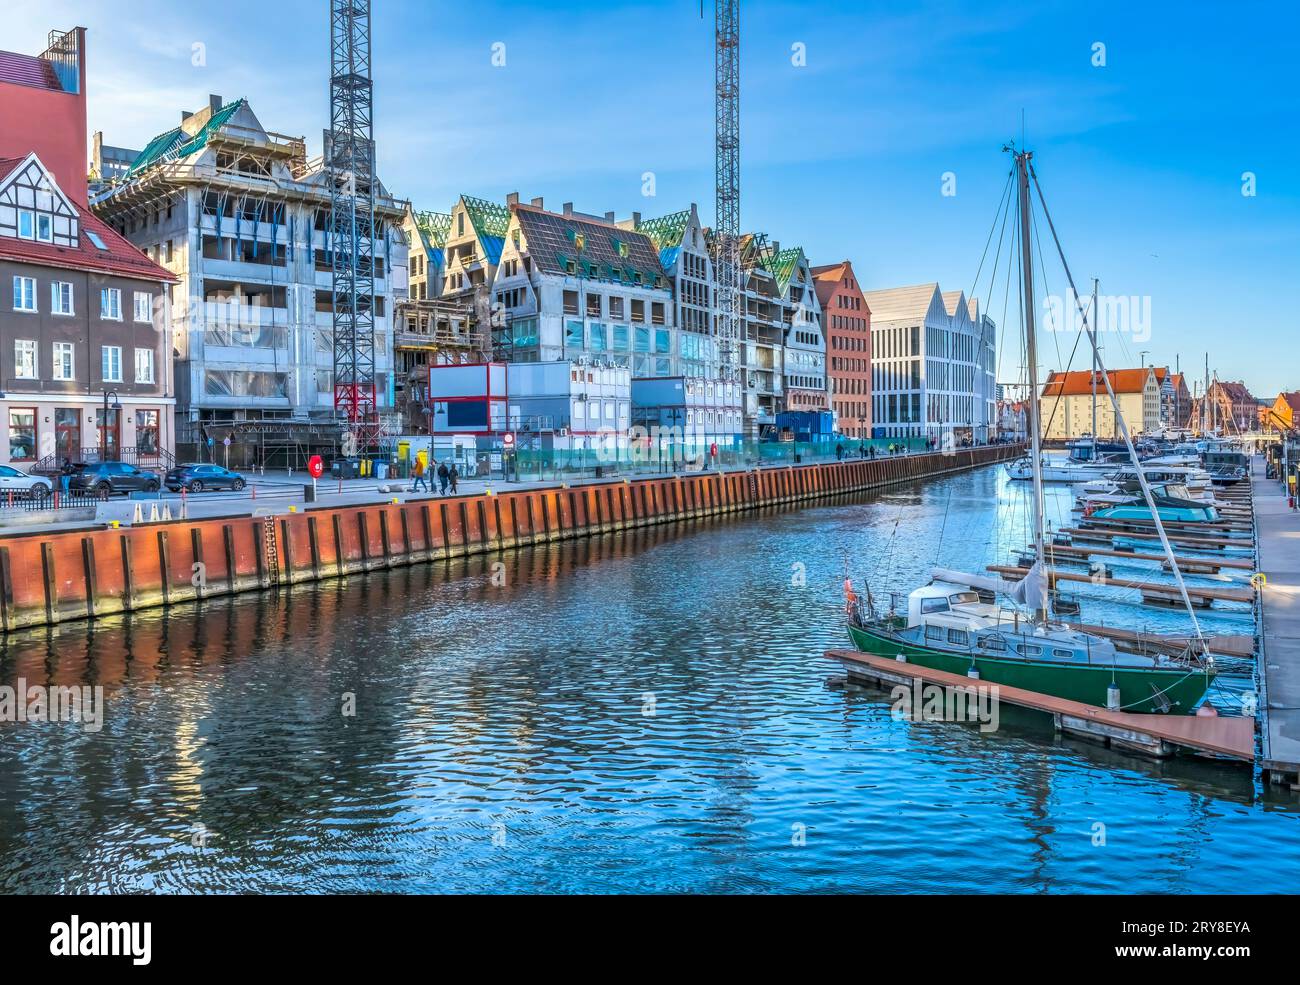 Colorful Yachts Sailboats Inner Harbor Port Motlawa River Historic Old Town of Gdansk Poland. City formerly known as Danzig. Stock Photo